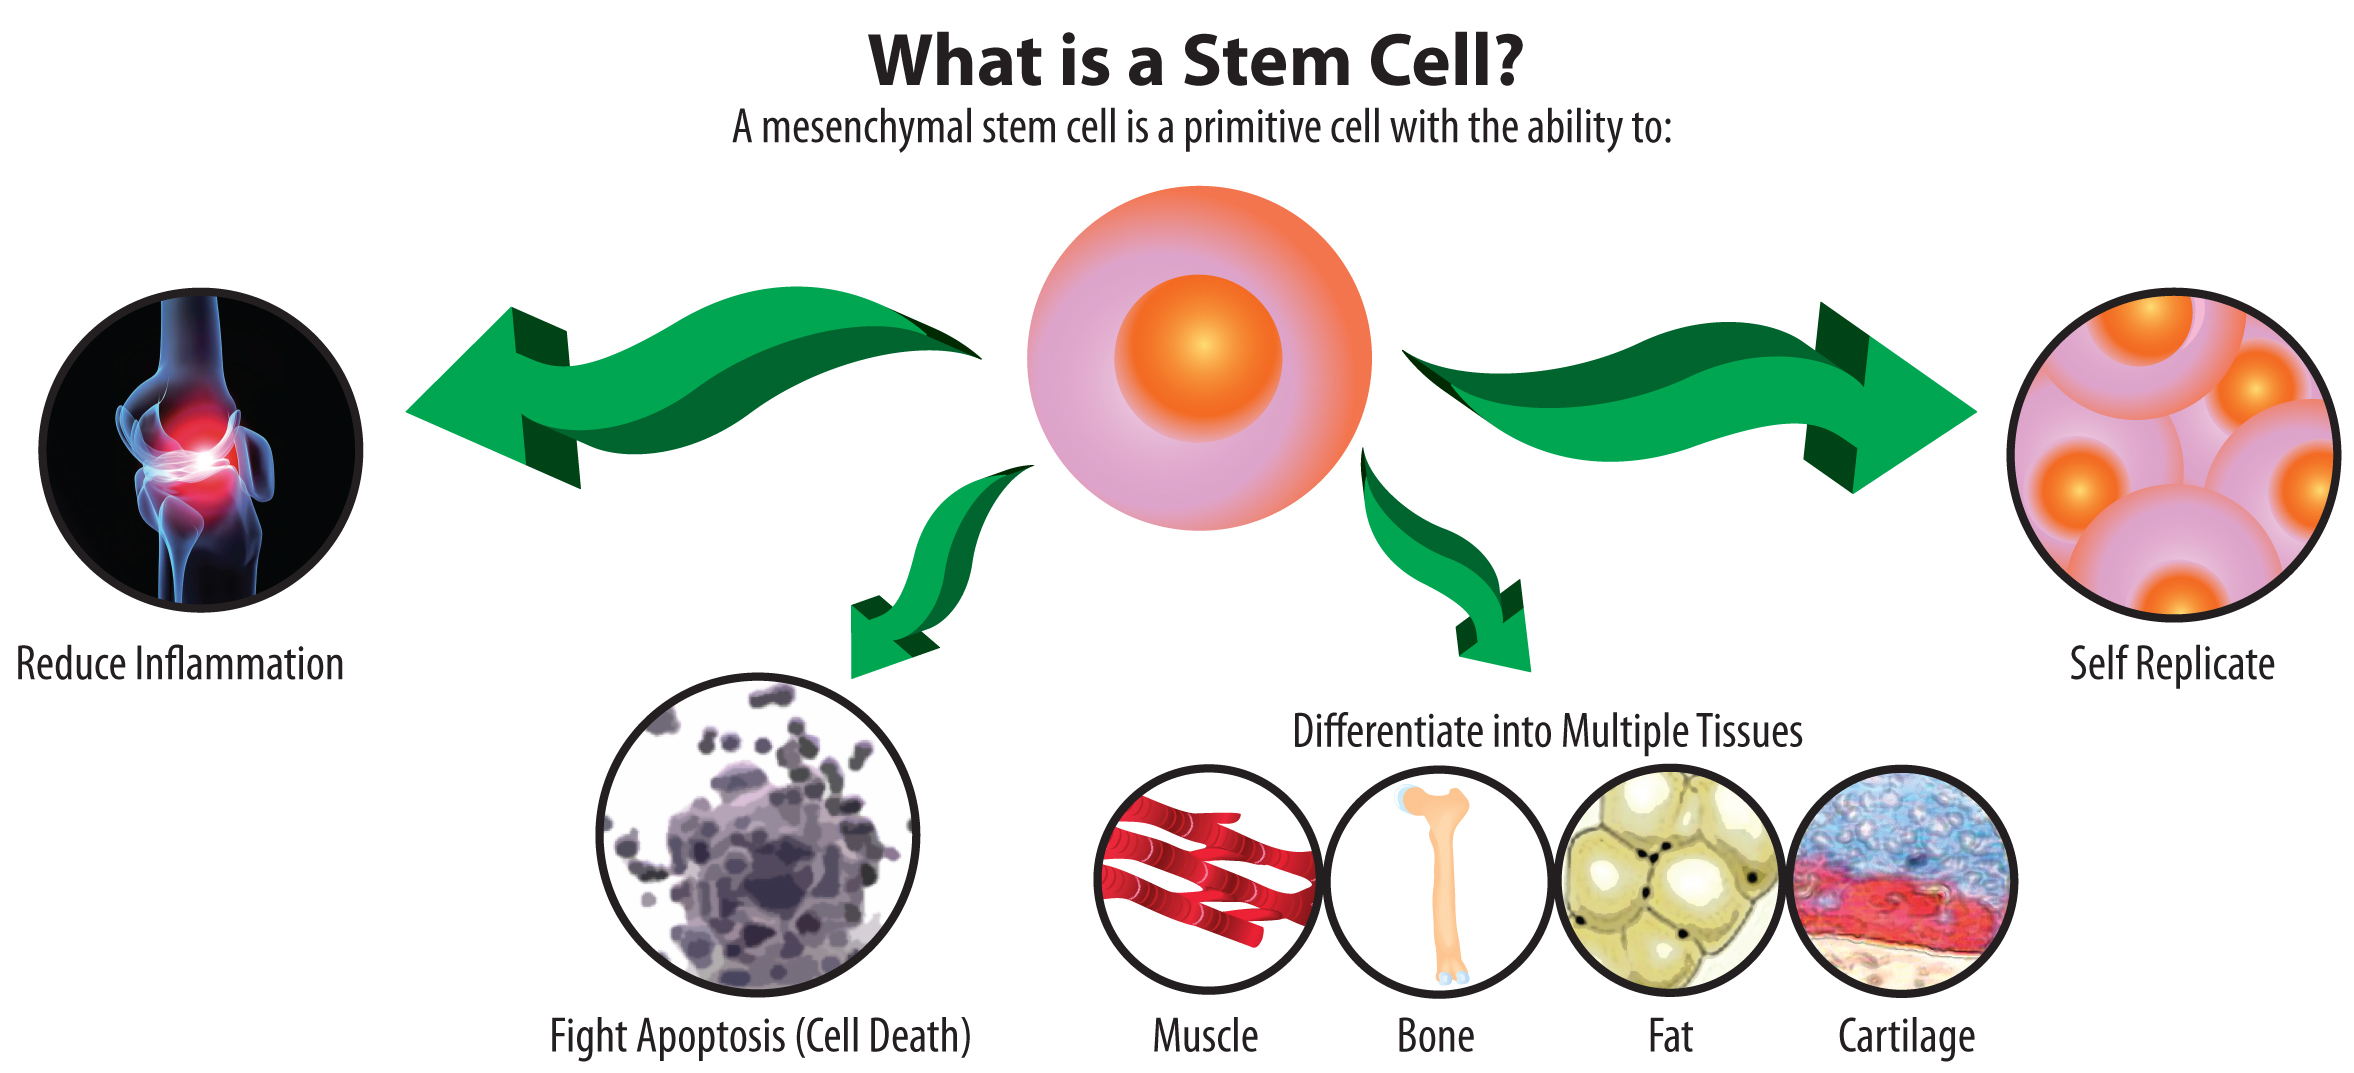 What Is A Stem Cell Photo Credit : www.tsaog.com